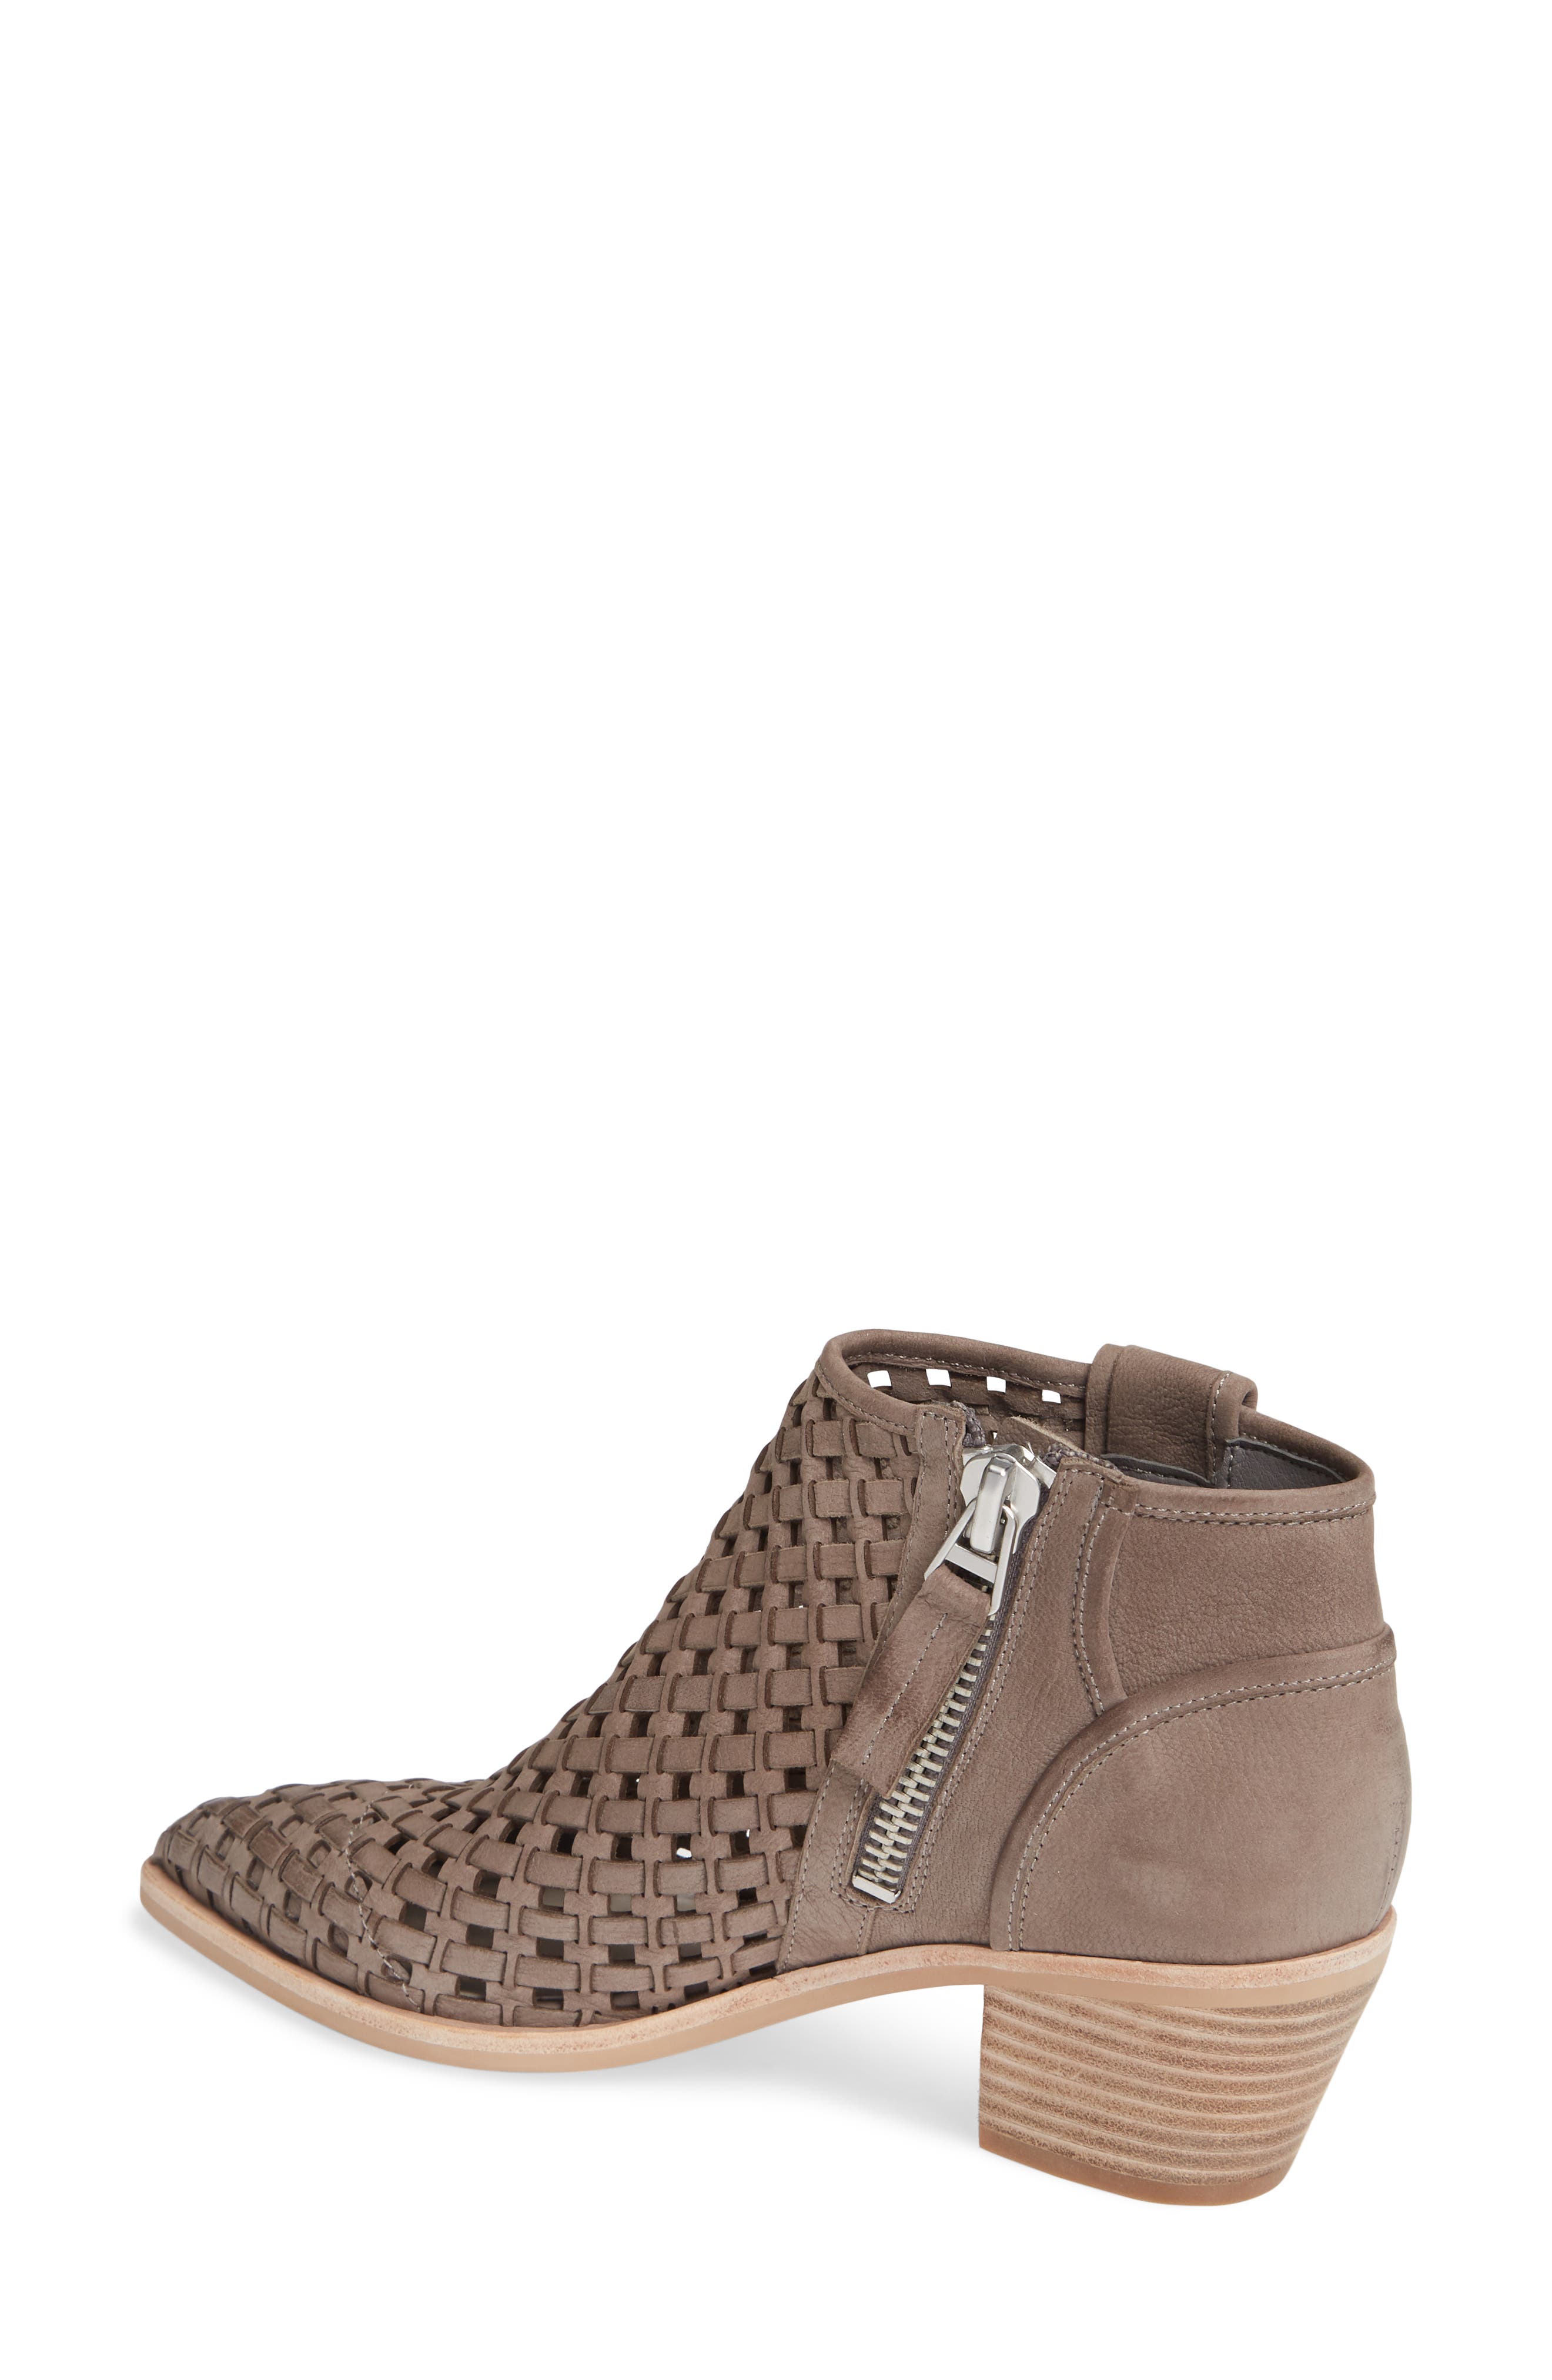 dolce vita spence woven bootie